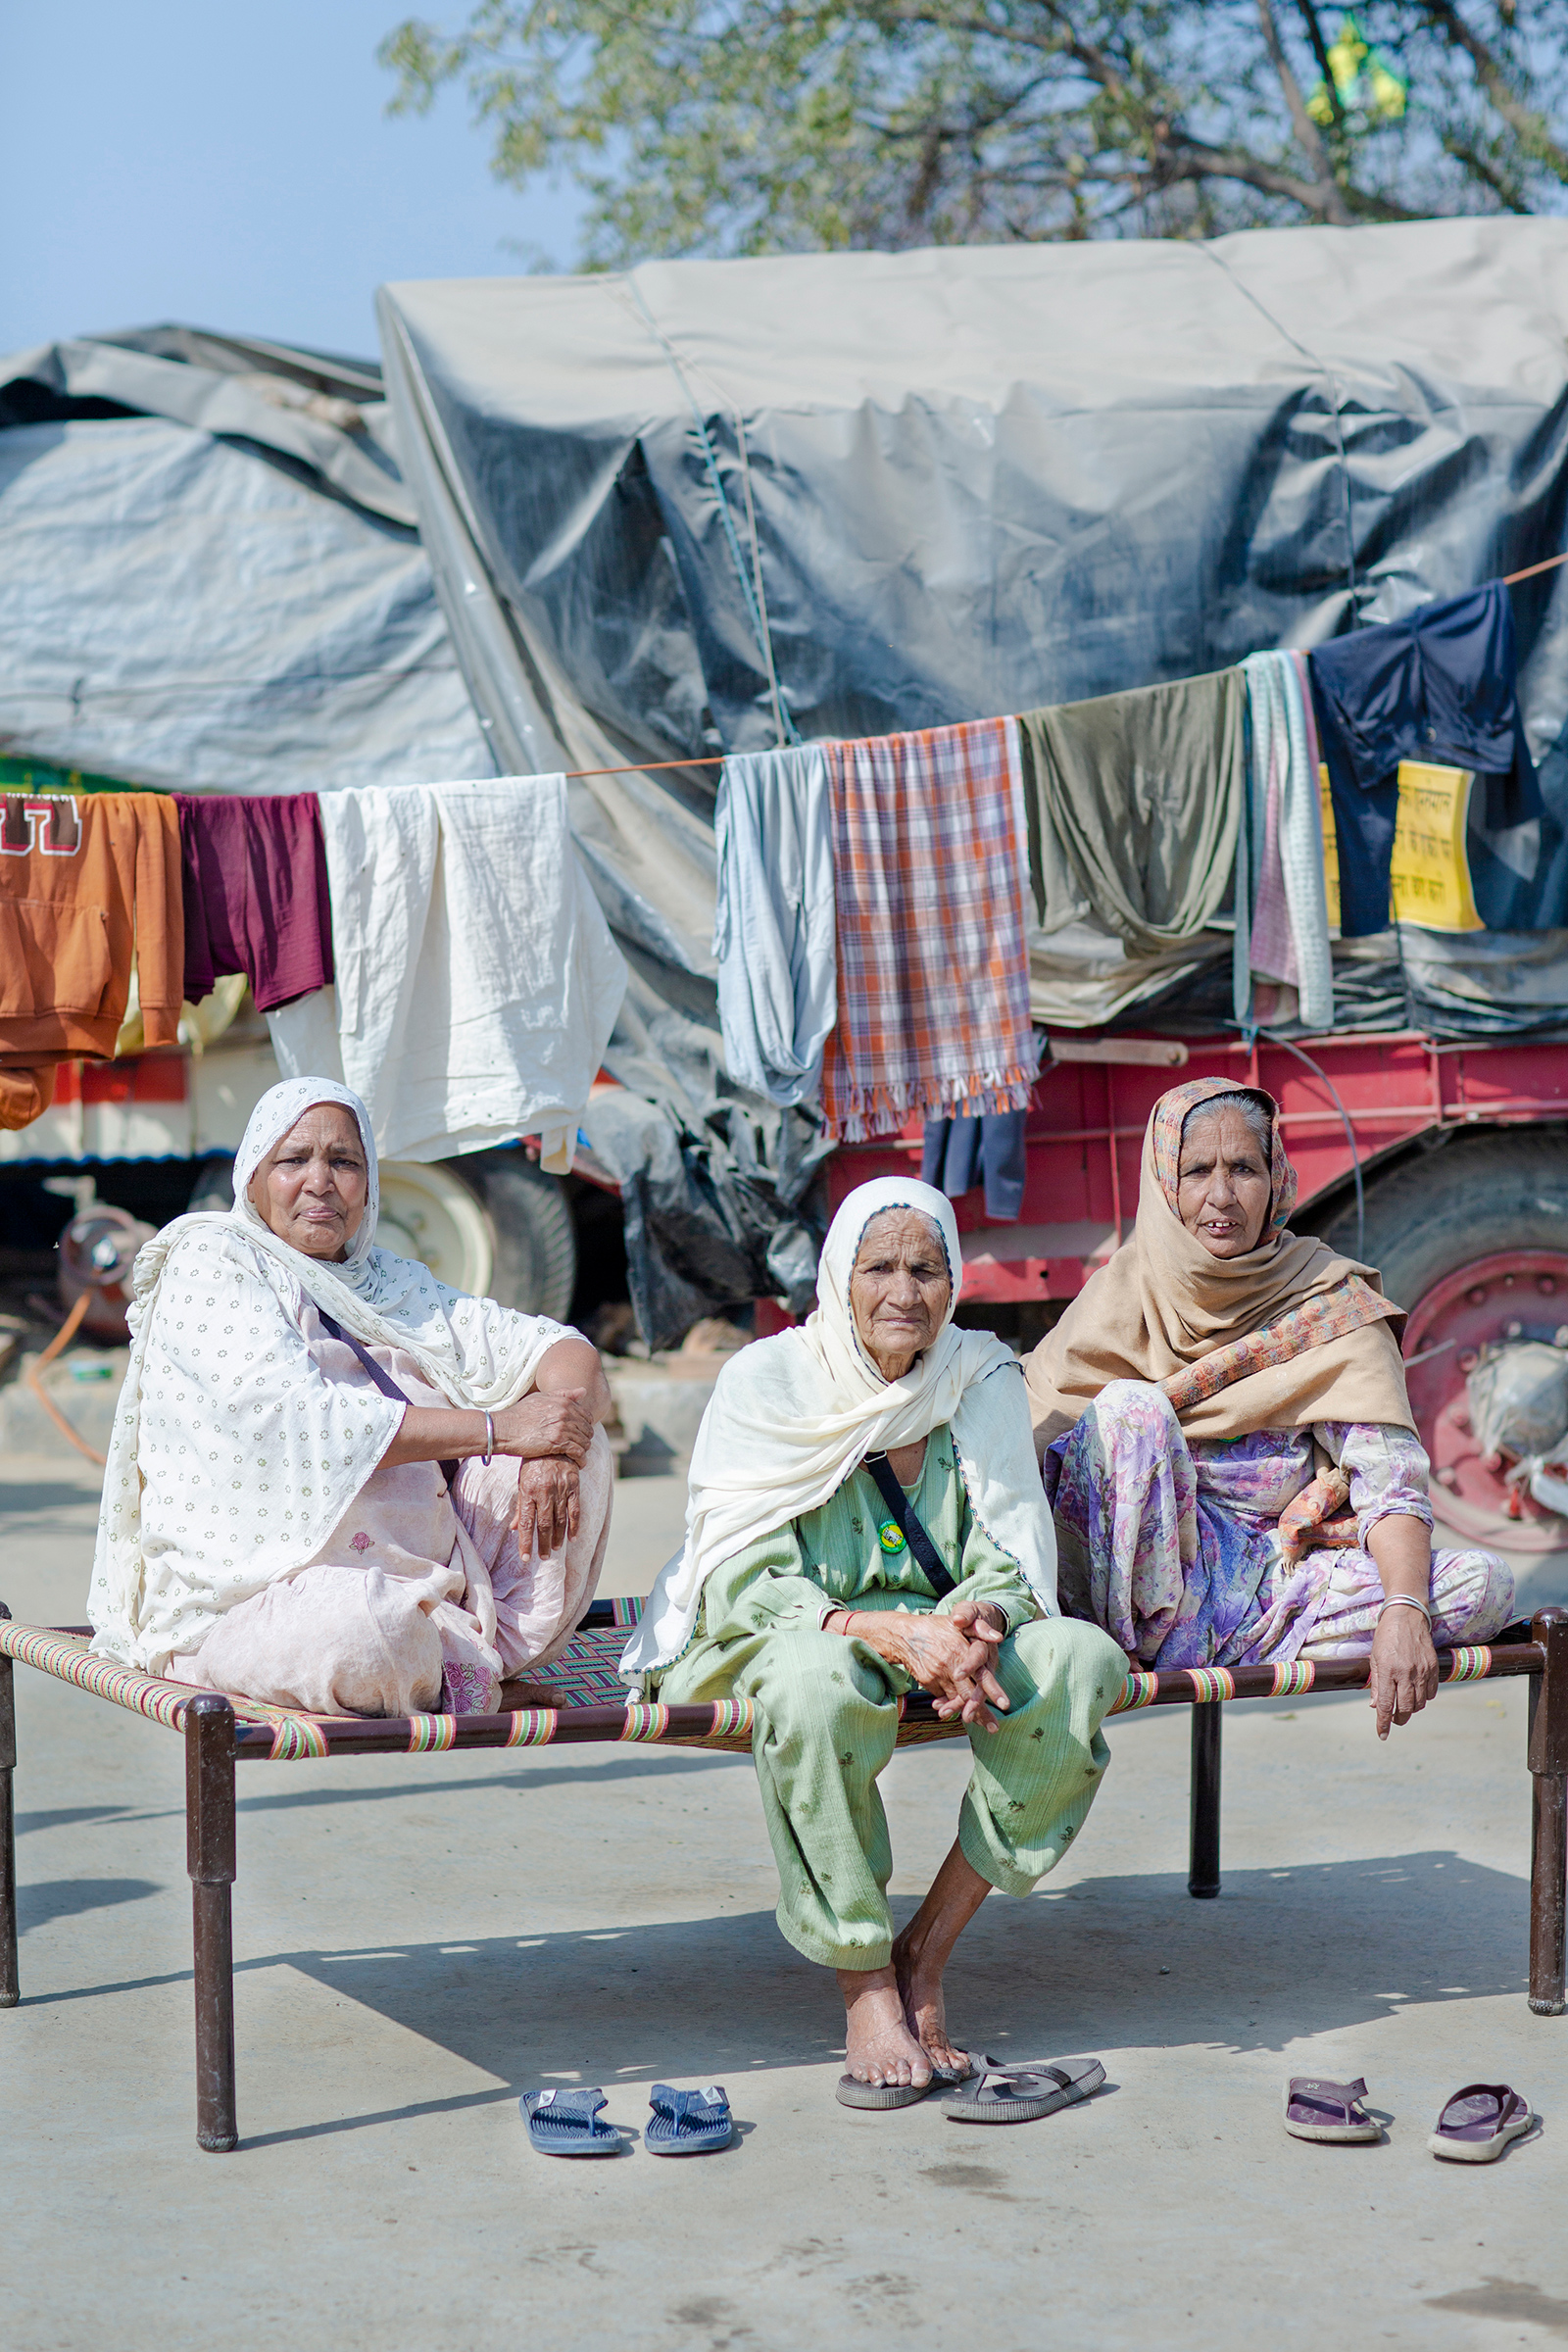 The protests have drawn women of all ages. While some speak onstage, others are simply determined to be present. “I am an illiterate woman,” says Gurmer Kaur, center, at the protests with her friends Surjit Kaur, left, and Jaswant Kaur, right, all in their mid-70s. “I cannot talk well, but I can sit tight—and I will sit here till the next elections if these laws are not called off.” (Kanishka Sonthalia for TIME)